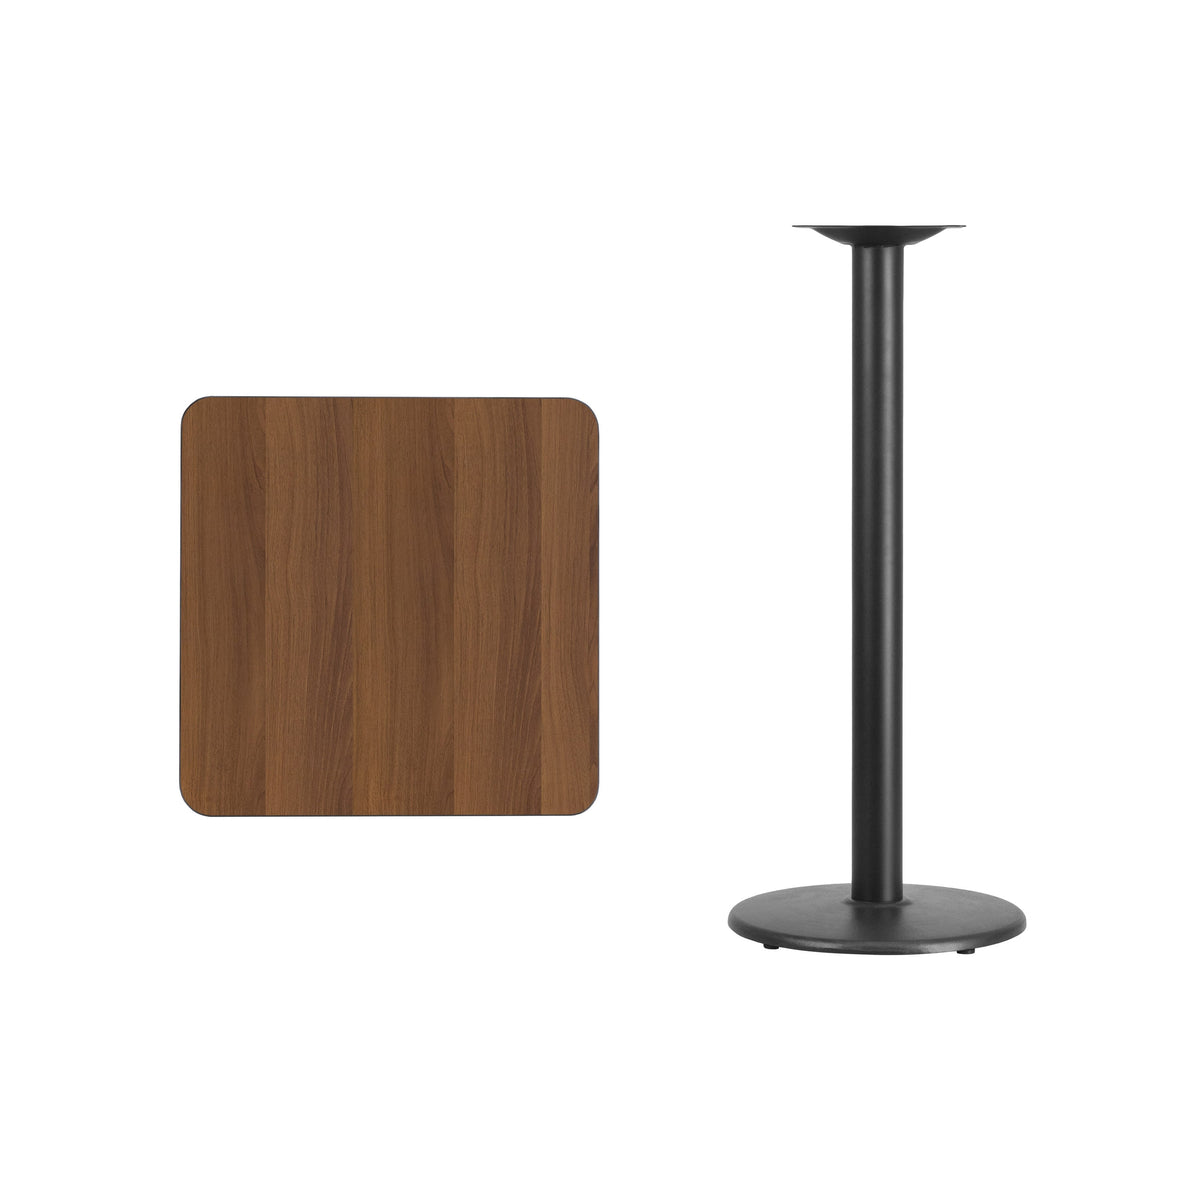 Walnut |#| 24inch Square Walnut Laminate Table Top with 18inch Round Bar Height Table Base